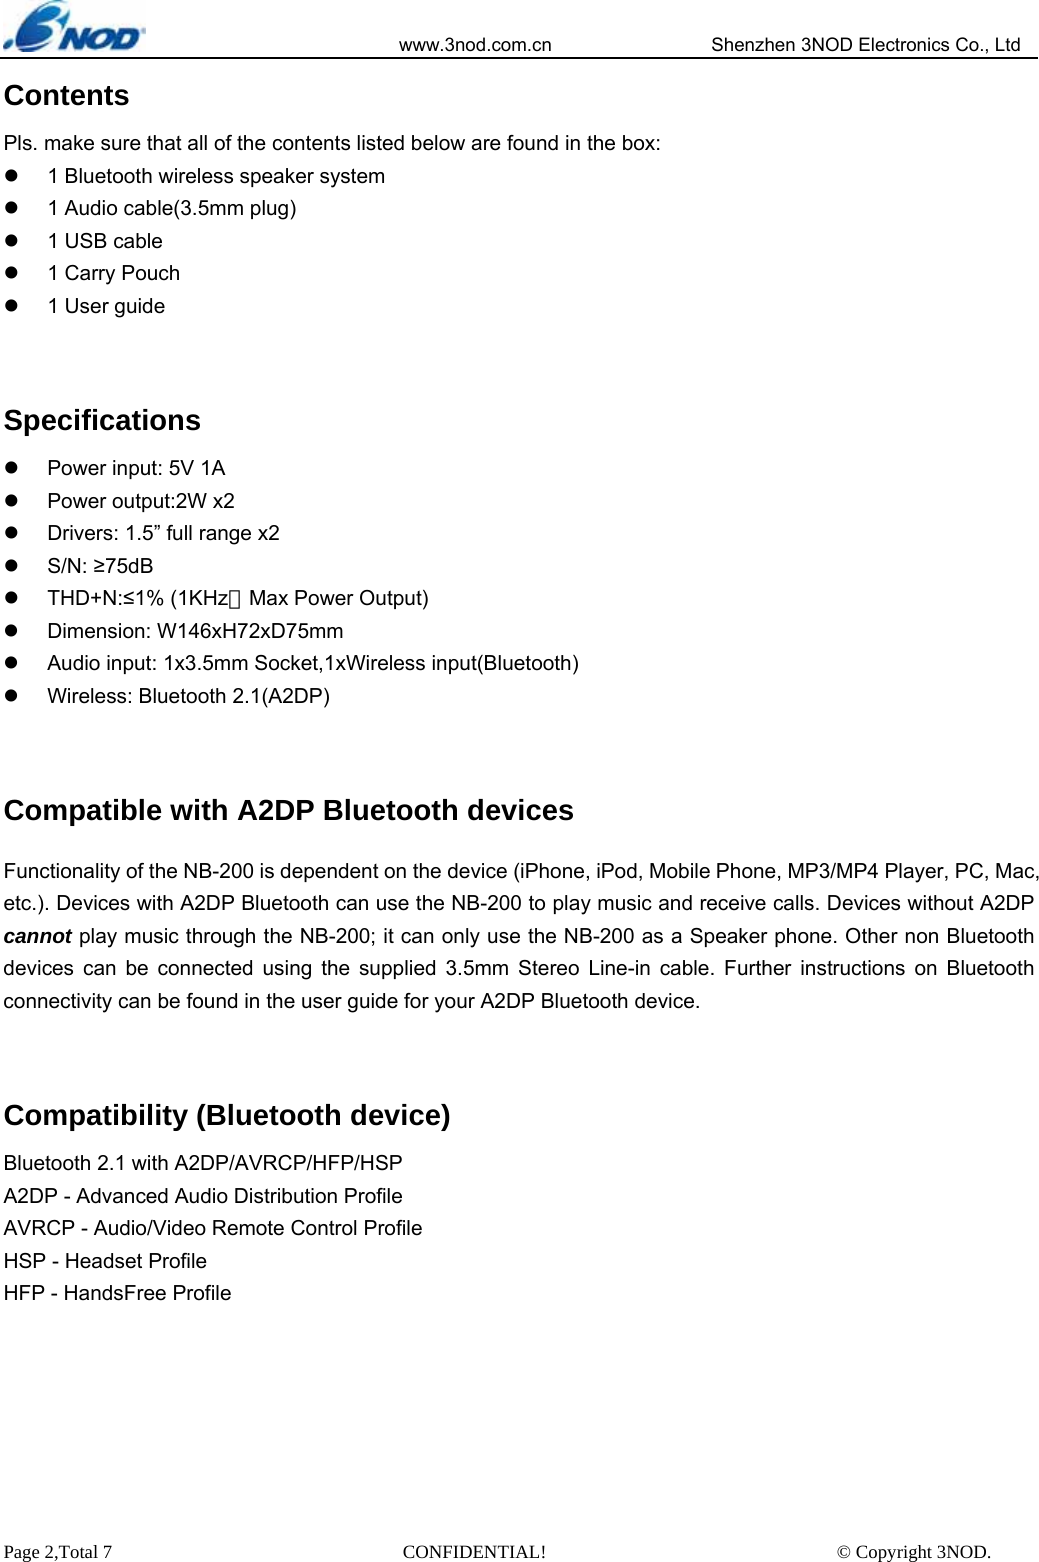                            www.3nod.com.cn                  Shenzhen 3NOD Electronics Co., Ltd Page 2,Total 7                               CONFIDENTIAL!                               © Copyright 3NOD. Contents Pls. make sure that all of the contents listed below are found in the box: z  1 Bluetooth wireless speaker system z  1 Audio cable(3.5mm plug) z  1 USB cable z  1 Carry Pouch z  1 User guide  Specifications z  Power input: 5V 1A z  Power output:2W x2   z  Drivers: 1.5” full range x2 z S/N: ≥75dB z THD+N:≤1% (1KHz，Max Power Output) z Dimension: W146xH72xD75mm z  Audio input: 1x3.5mm Socket,1xWireless input(Bluetooth) z  Wireless: Bluetooth 2.1(A2DP)  Compatible with A2DP Bluetooth devices Functionality of the NB-200 is dependent on the device (iPhone, iPod, Mobile Phone, MP3/MP4 Player, PC, Mac, etc.). Devices with A2DP Bluetooth can use the NB-200 to play music and receive calls. Devices without A2DP cannot play music through the NB-200; it can only use the NB-200 as a Speaker phone. Other non Bluetooth devices can be connected using the supplied 3.5mm Stereo Line-in cable. Further instructions on Bluetooth connectivity can be found in the user guide for your A2DP Bluetooth device.    Compatibility (Bluetooth device) Bluetooth 2.1 with A2DP/AVRCP/HFP/HSP A2DP - Advanced Audio Distribution Profile AVRCP - Audio/Video Remote Control Profile HSP - Headset Profile HFP - HandsFree Profile       